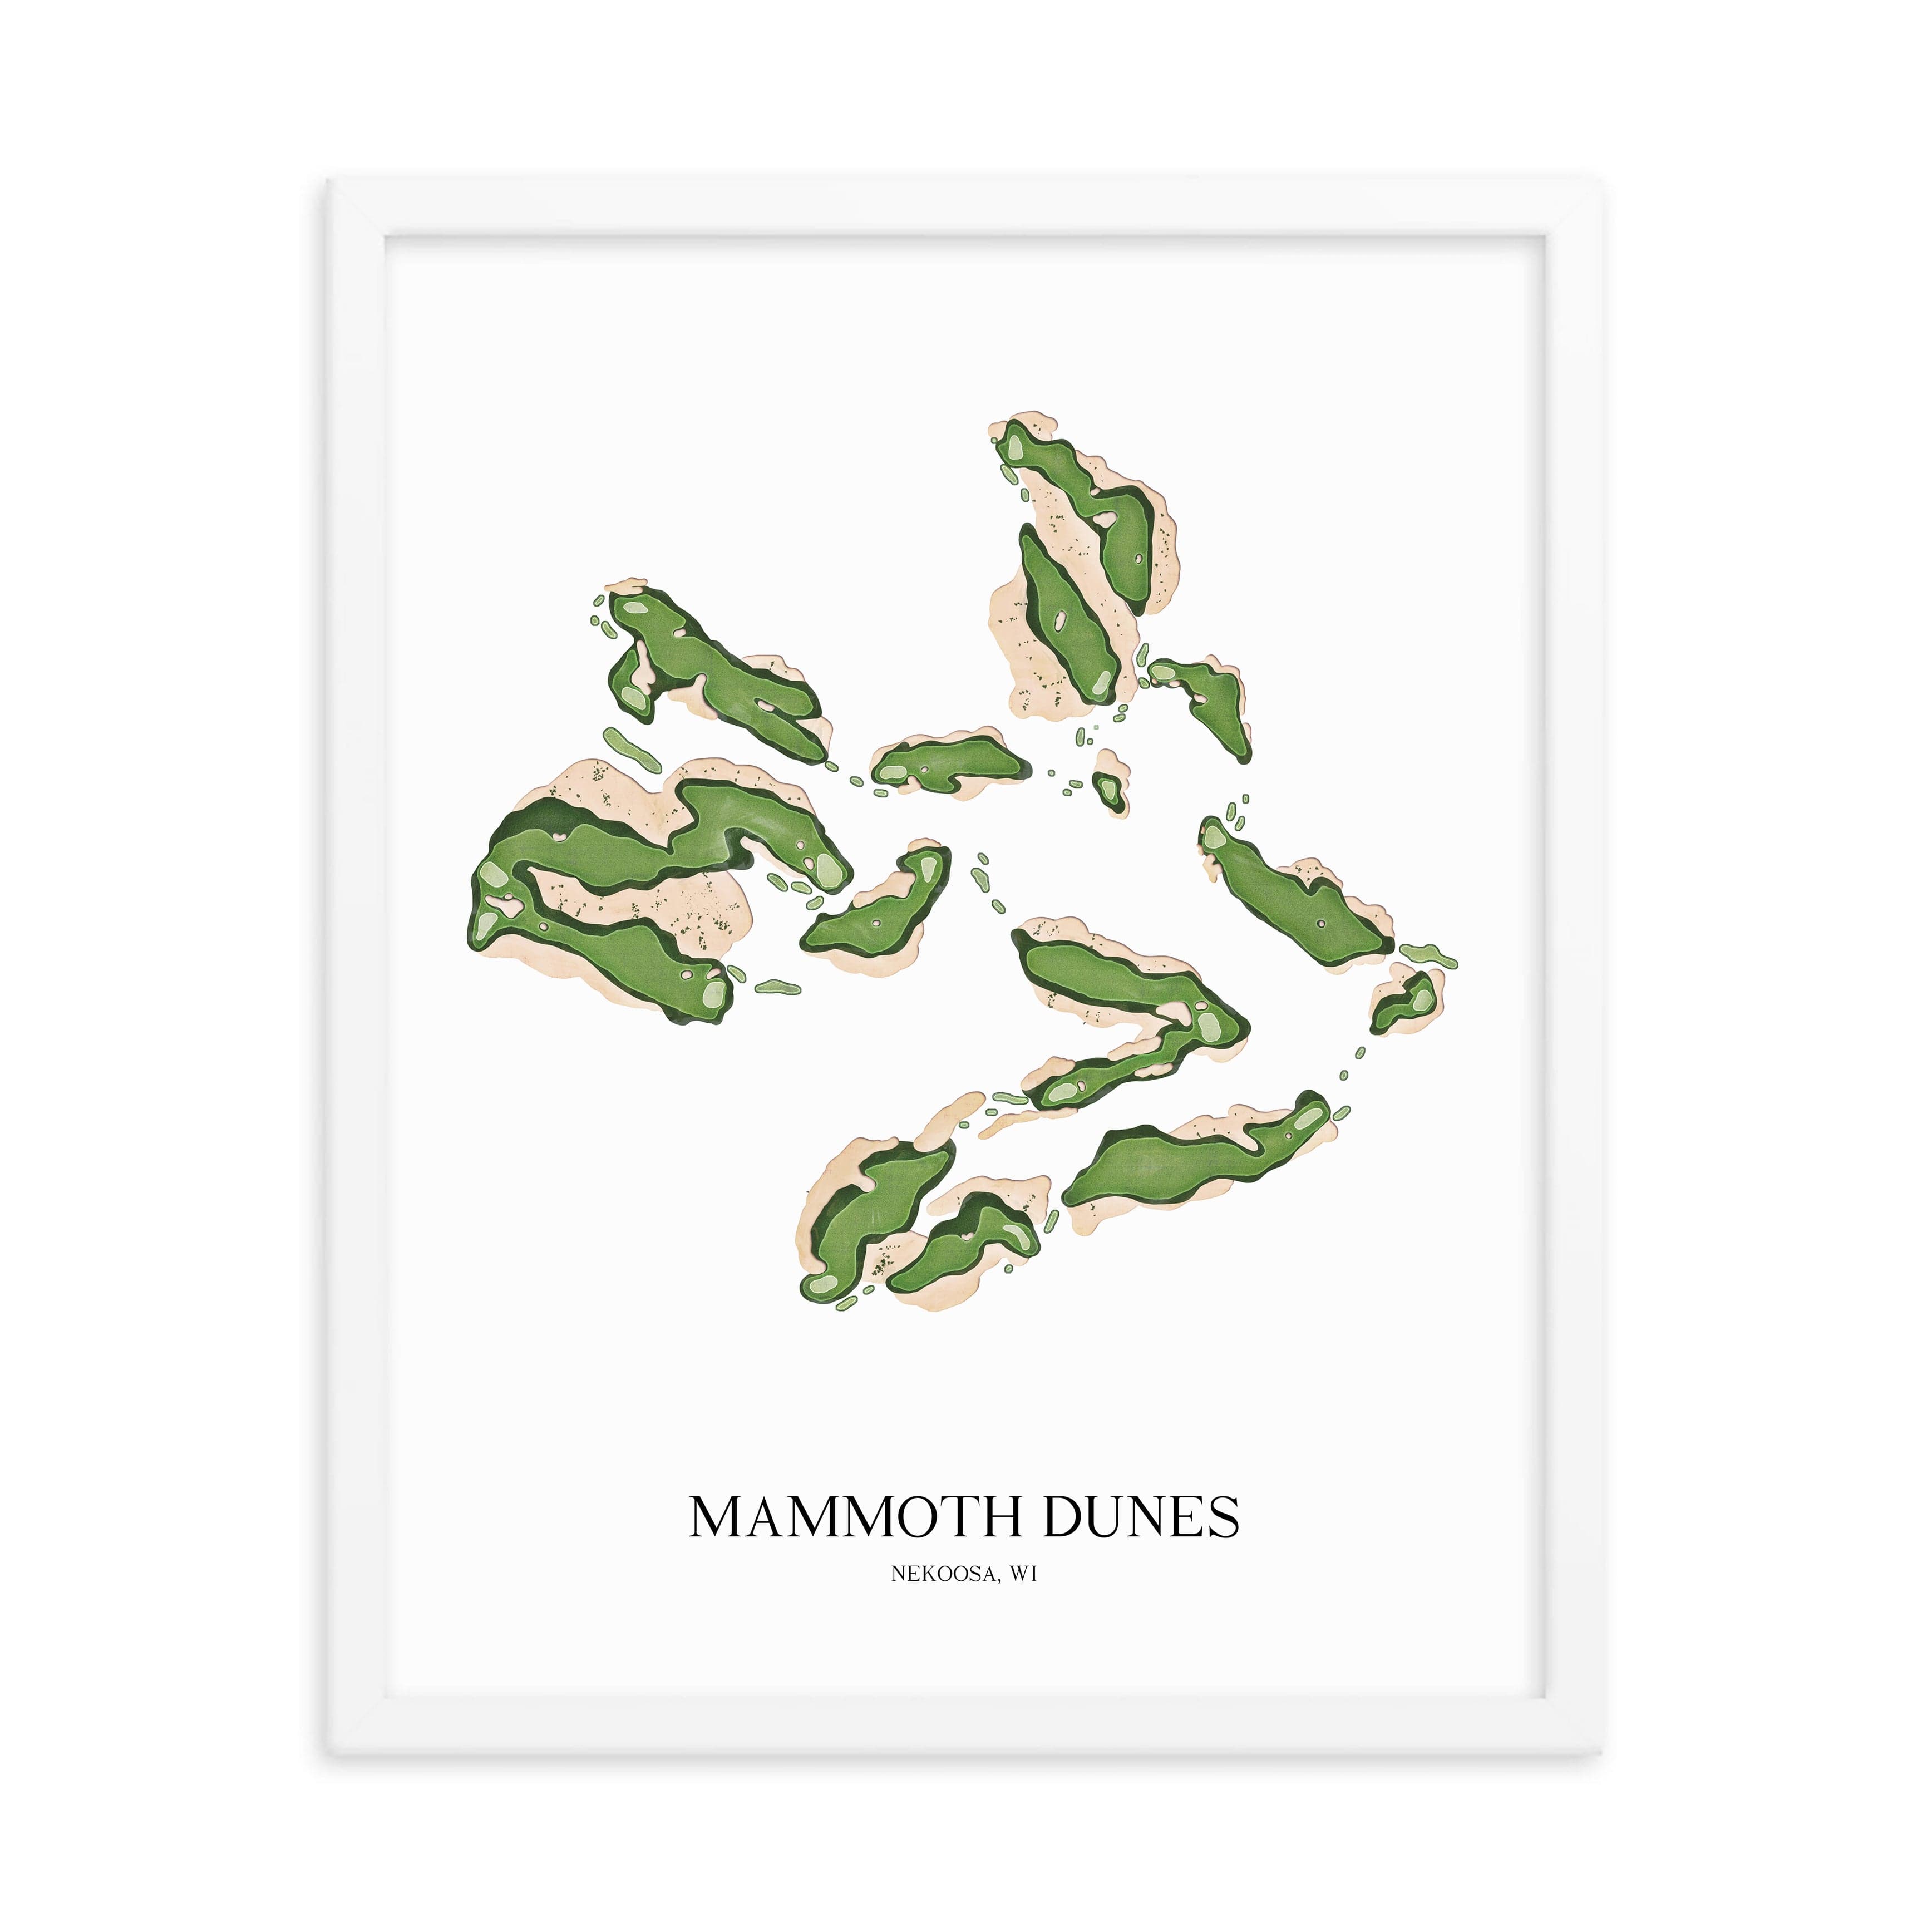 The 19th Hole Golf Shop - Golf Course Prints -  8" x 10" / White Mammoth Dunes Golf Course Map